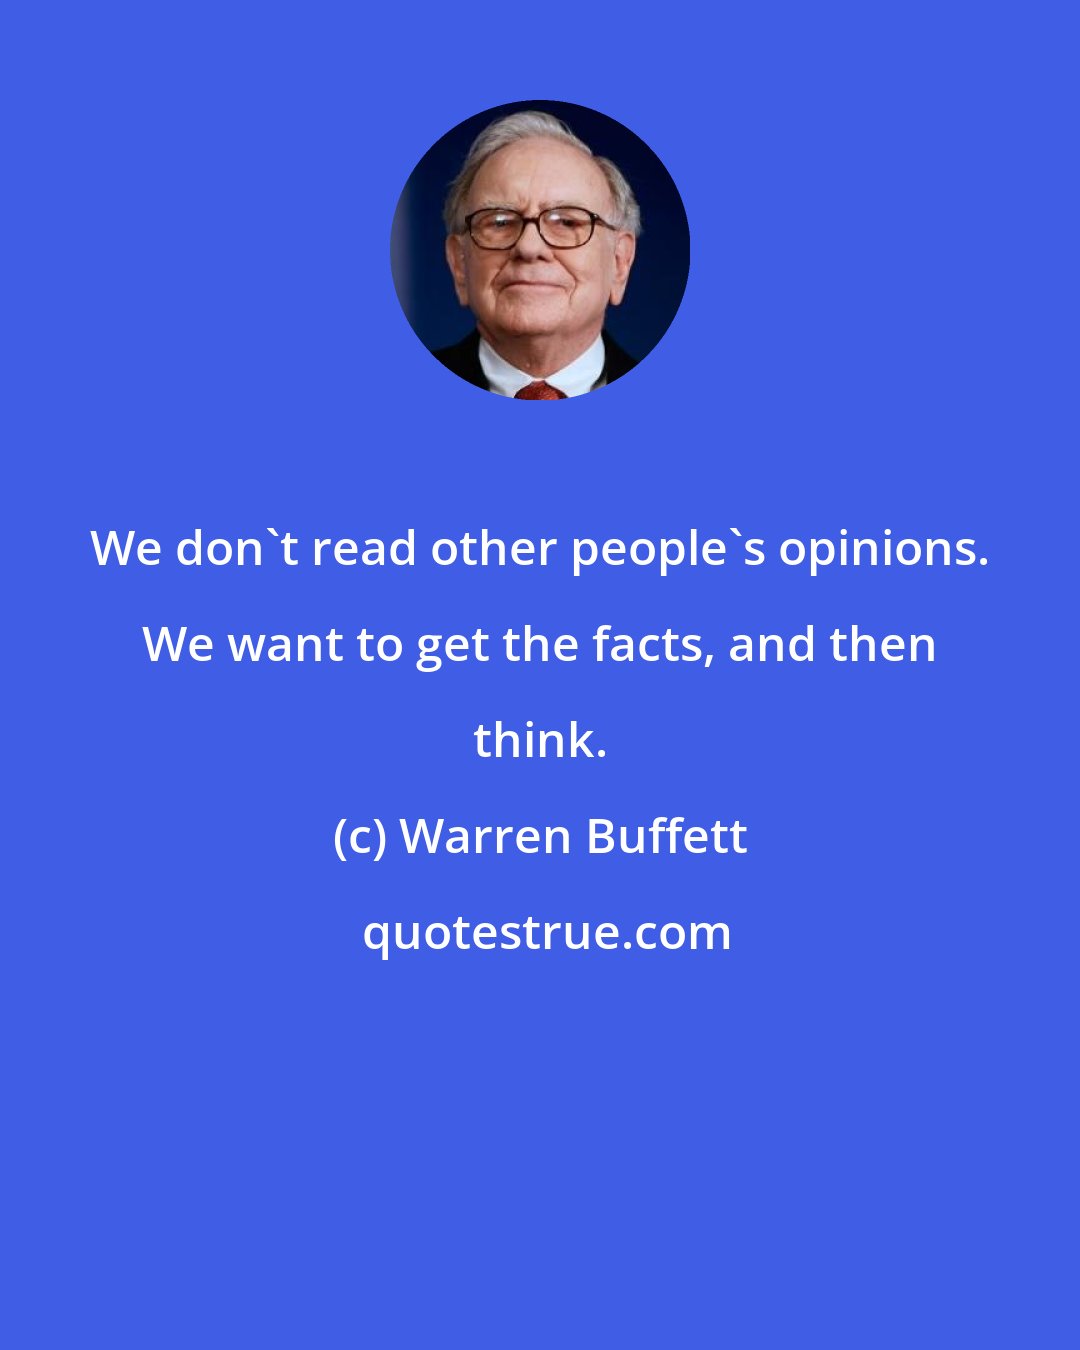 Warren Buffett: We don't read other people's opinions. We want to get the facts, and then think.